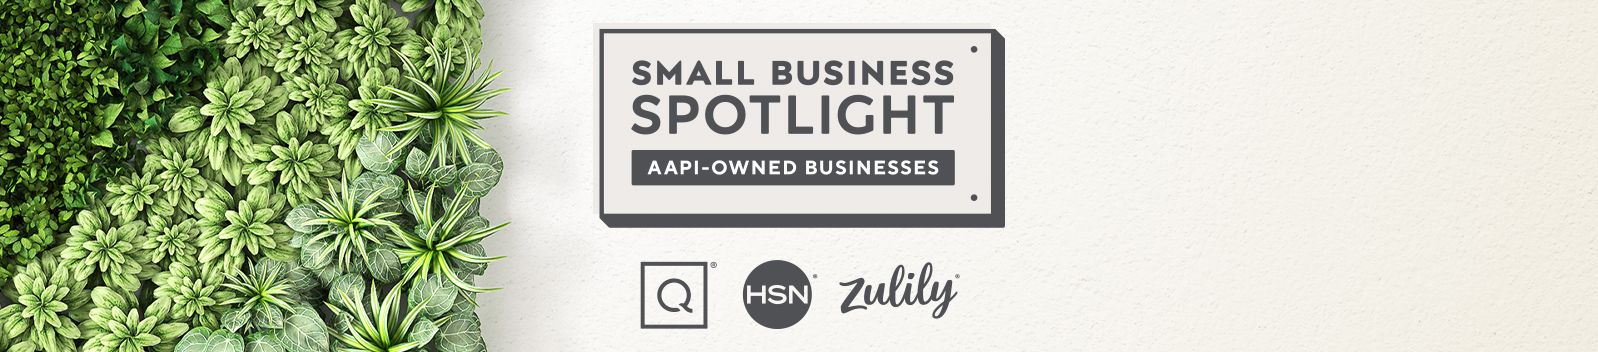 Small Business Spotlight: AAPI-Owned Businesses